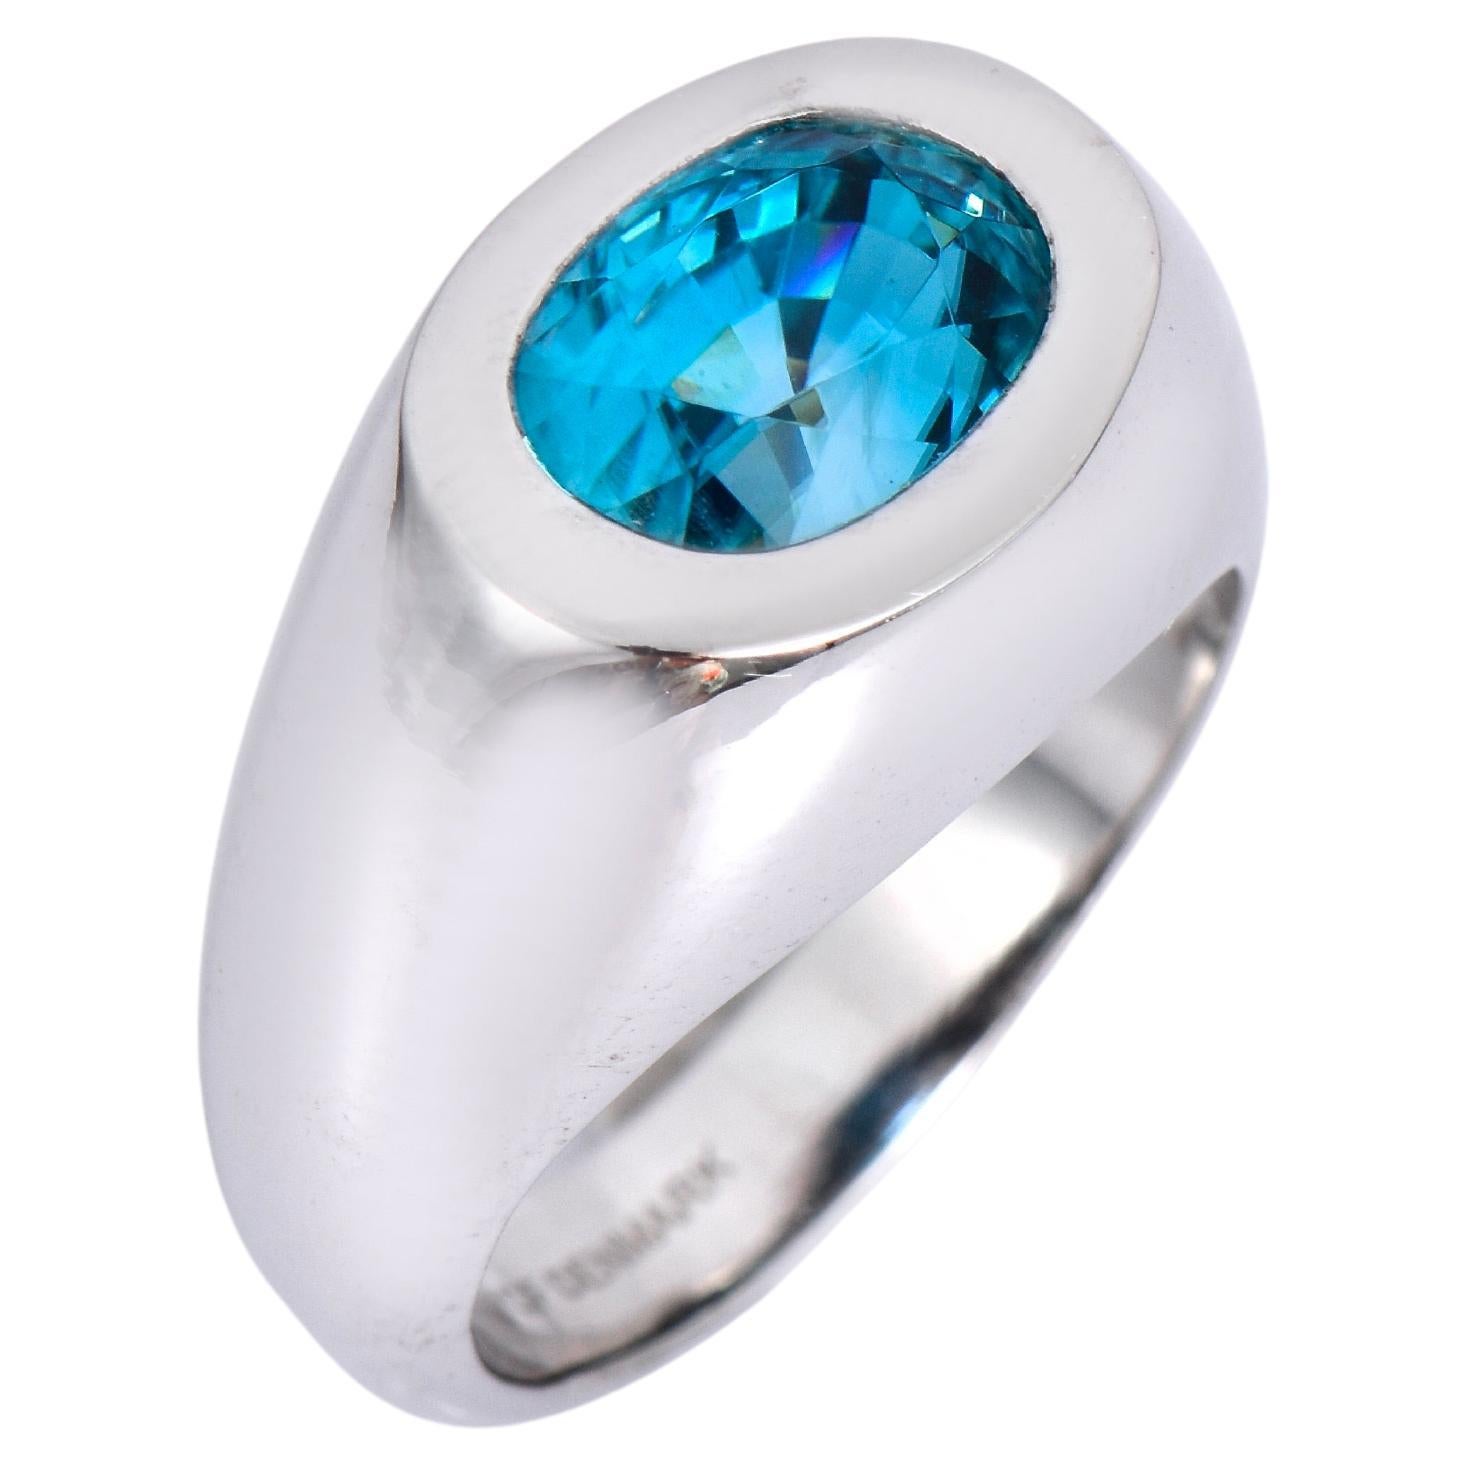 Orloff of Denmark, 5.92 ct Natural Blue Zircon Ring in 925 Sterling Silver For Sale